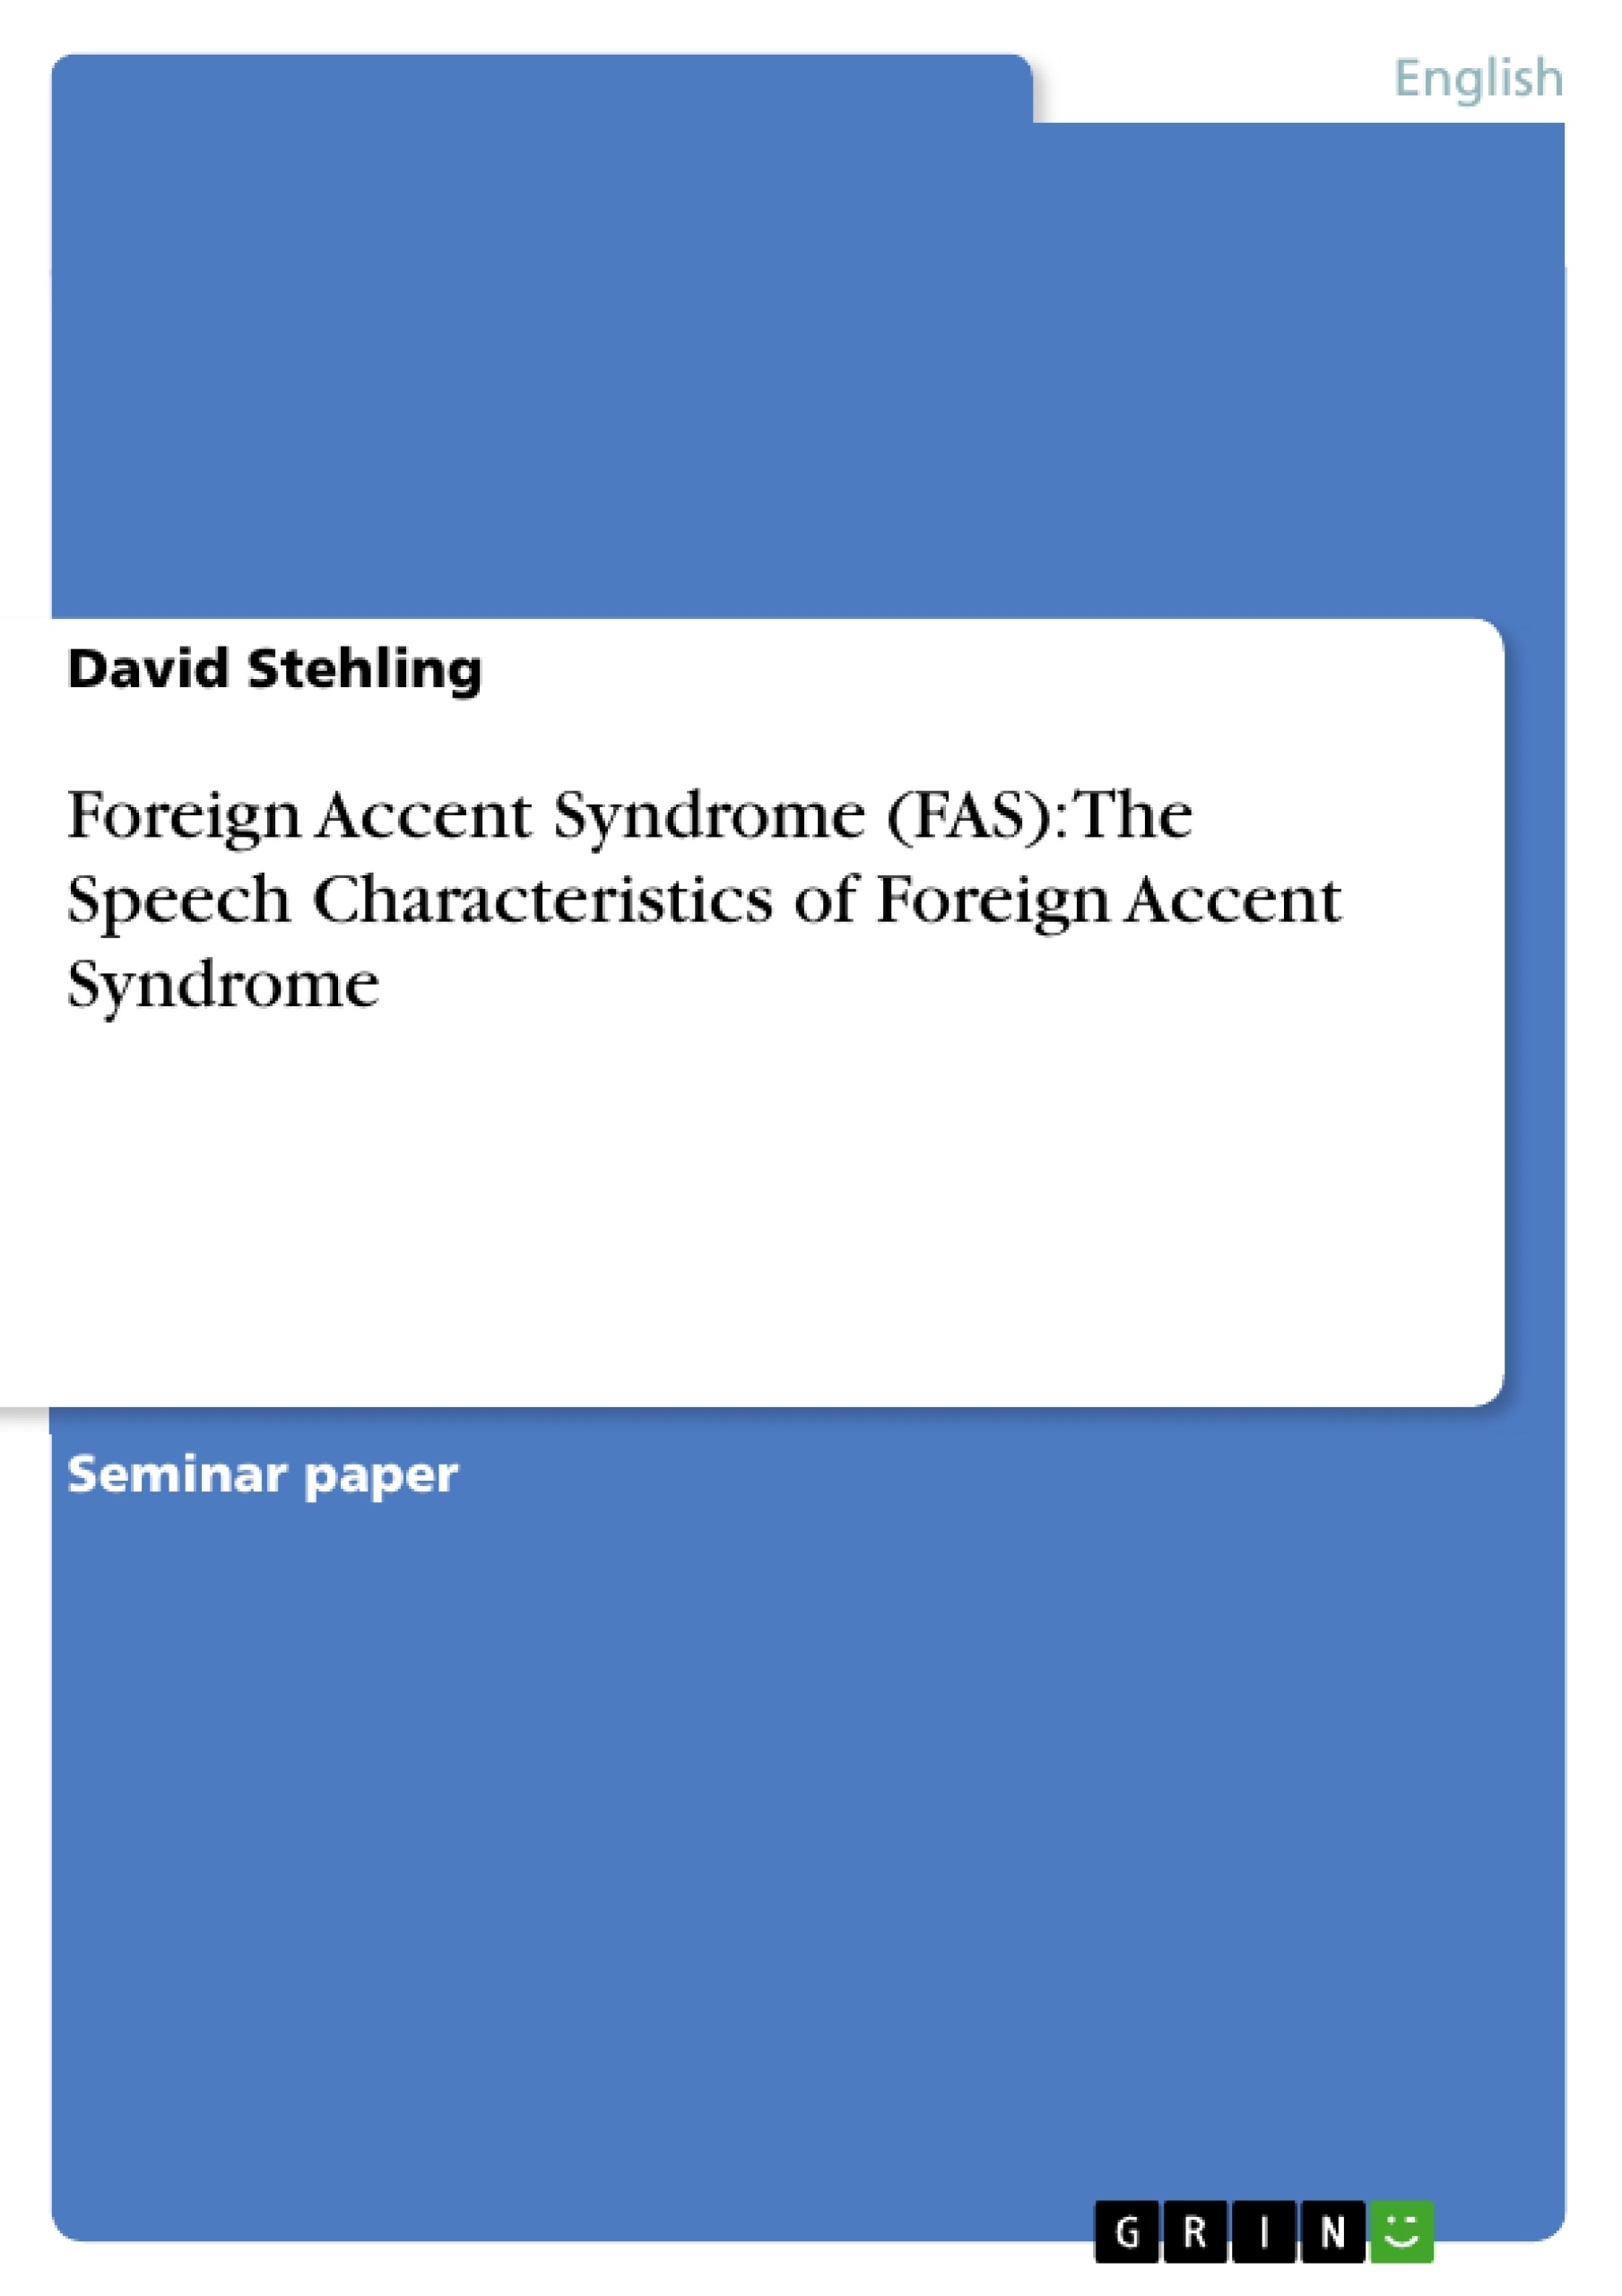 Titre: Foreign Accent Syndrome (FAS): The Speech Characteristics of Foreign Accent Syndrome